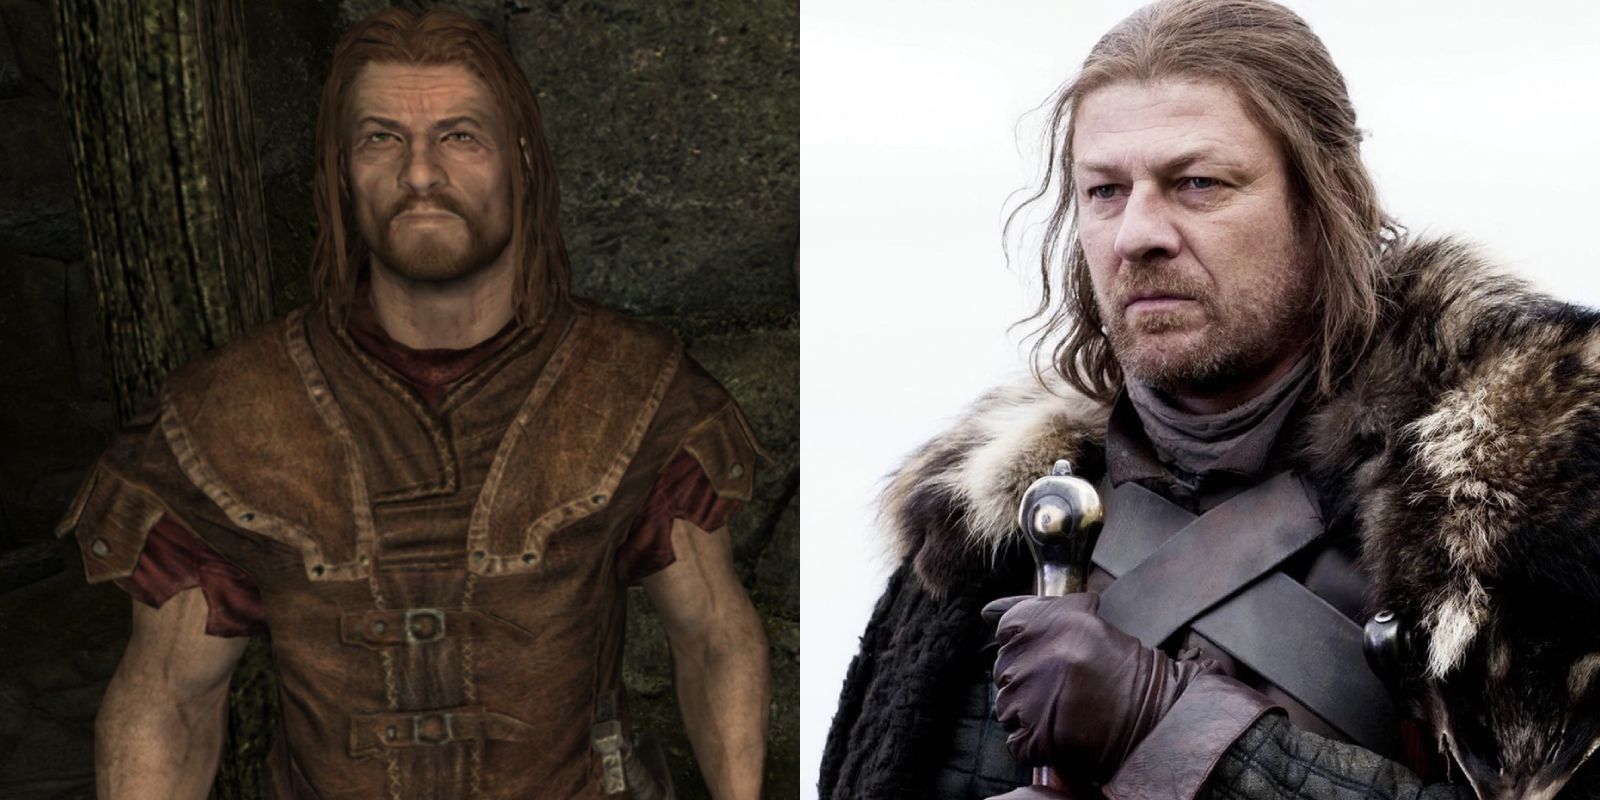 Skyrim In-Game Cosplay Famous Characters Armor Sean Bean Game Thrones Ned Stark Lord Rings Boromir